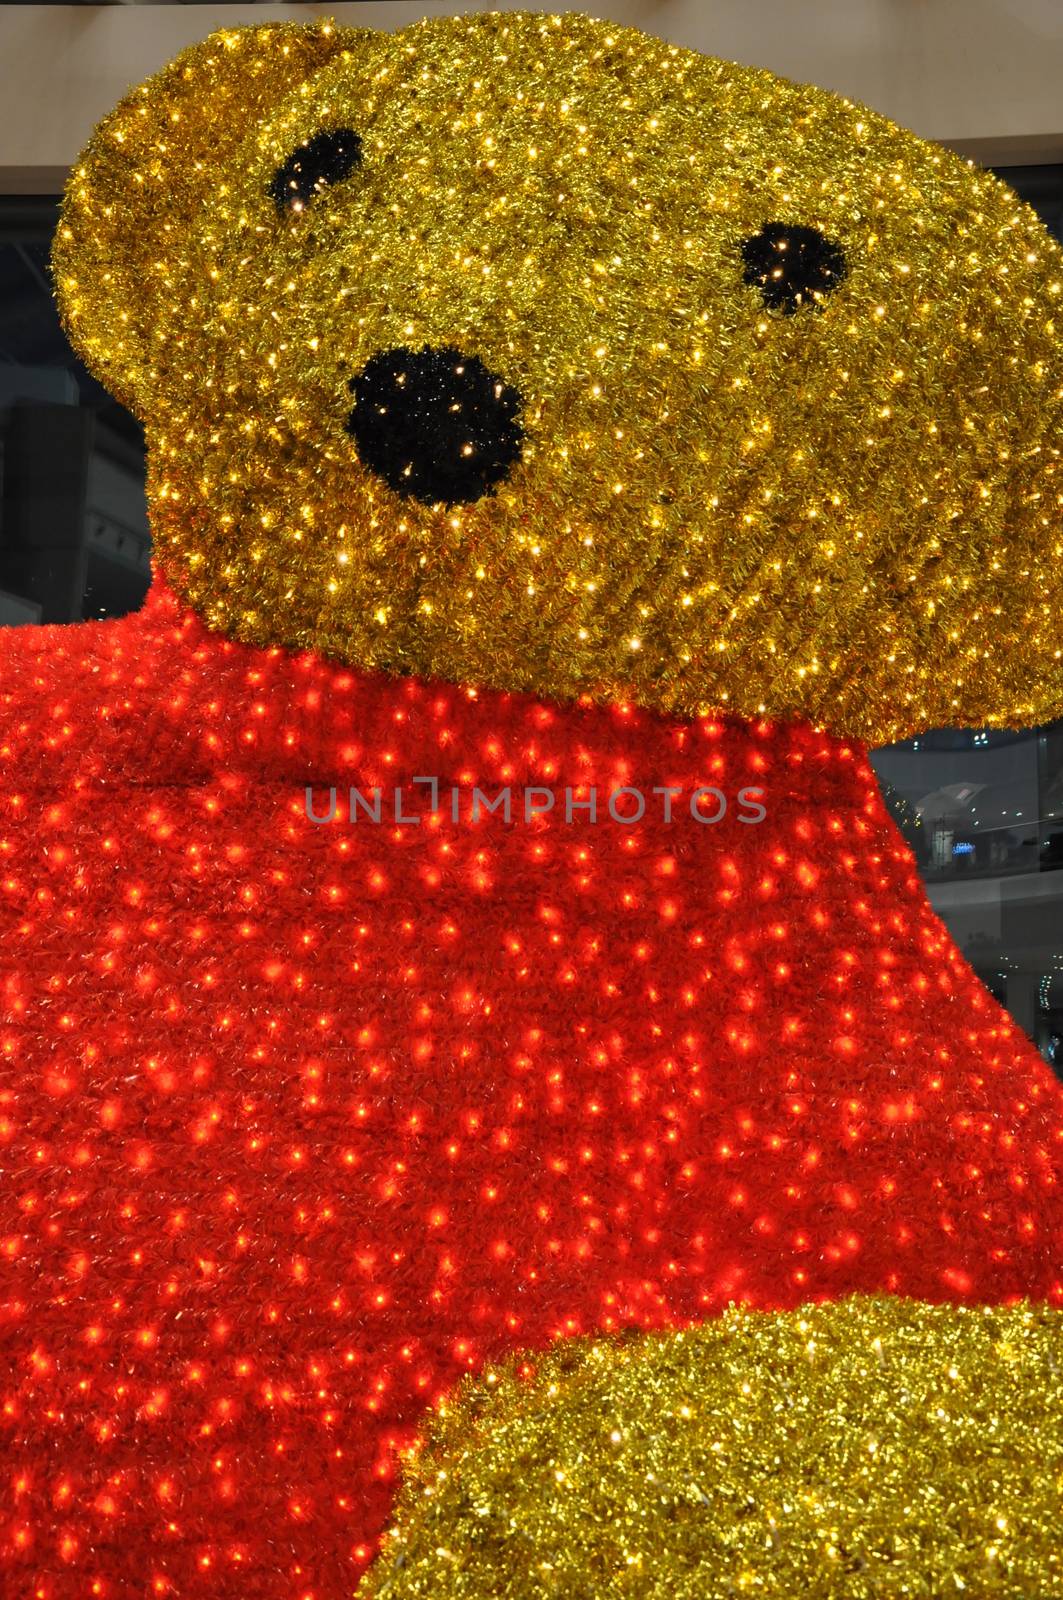 Teddy Bear at Festival Centre Mall in Dubai, UAE, as seen on Feb 8, 2014. Dubai Festival City is the Middle East's largest mixed-use development.